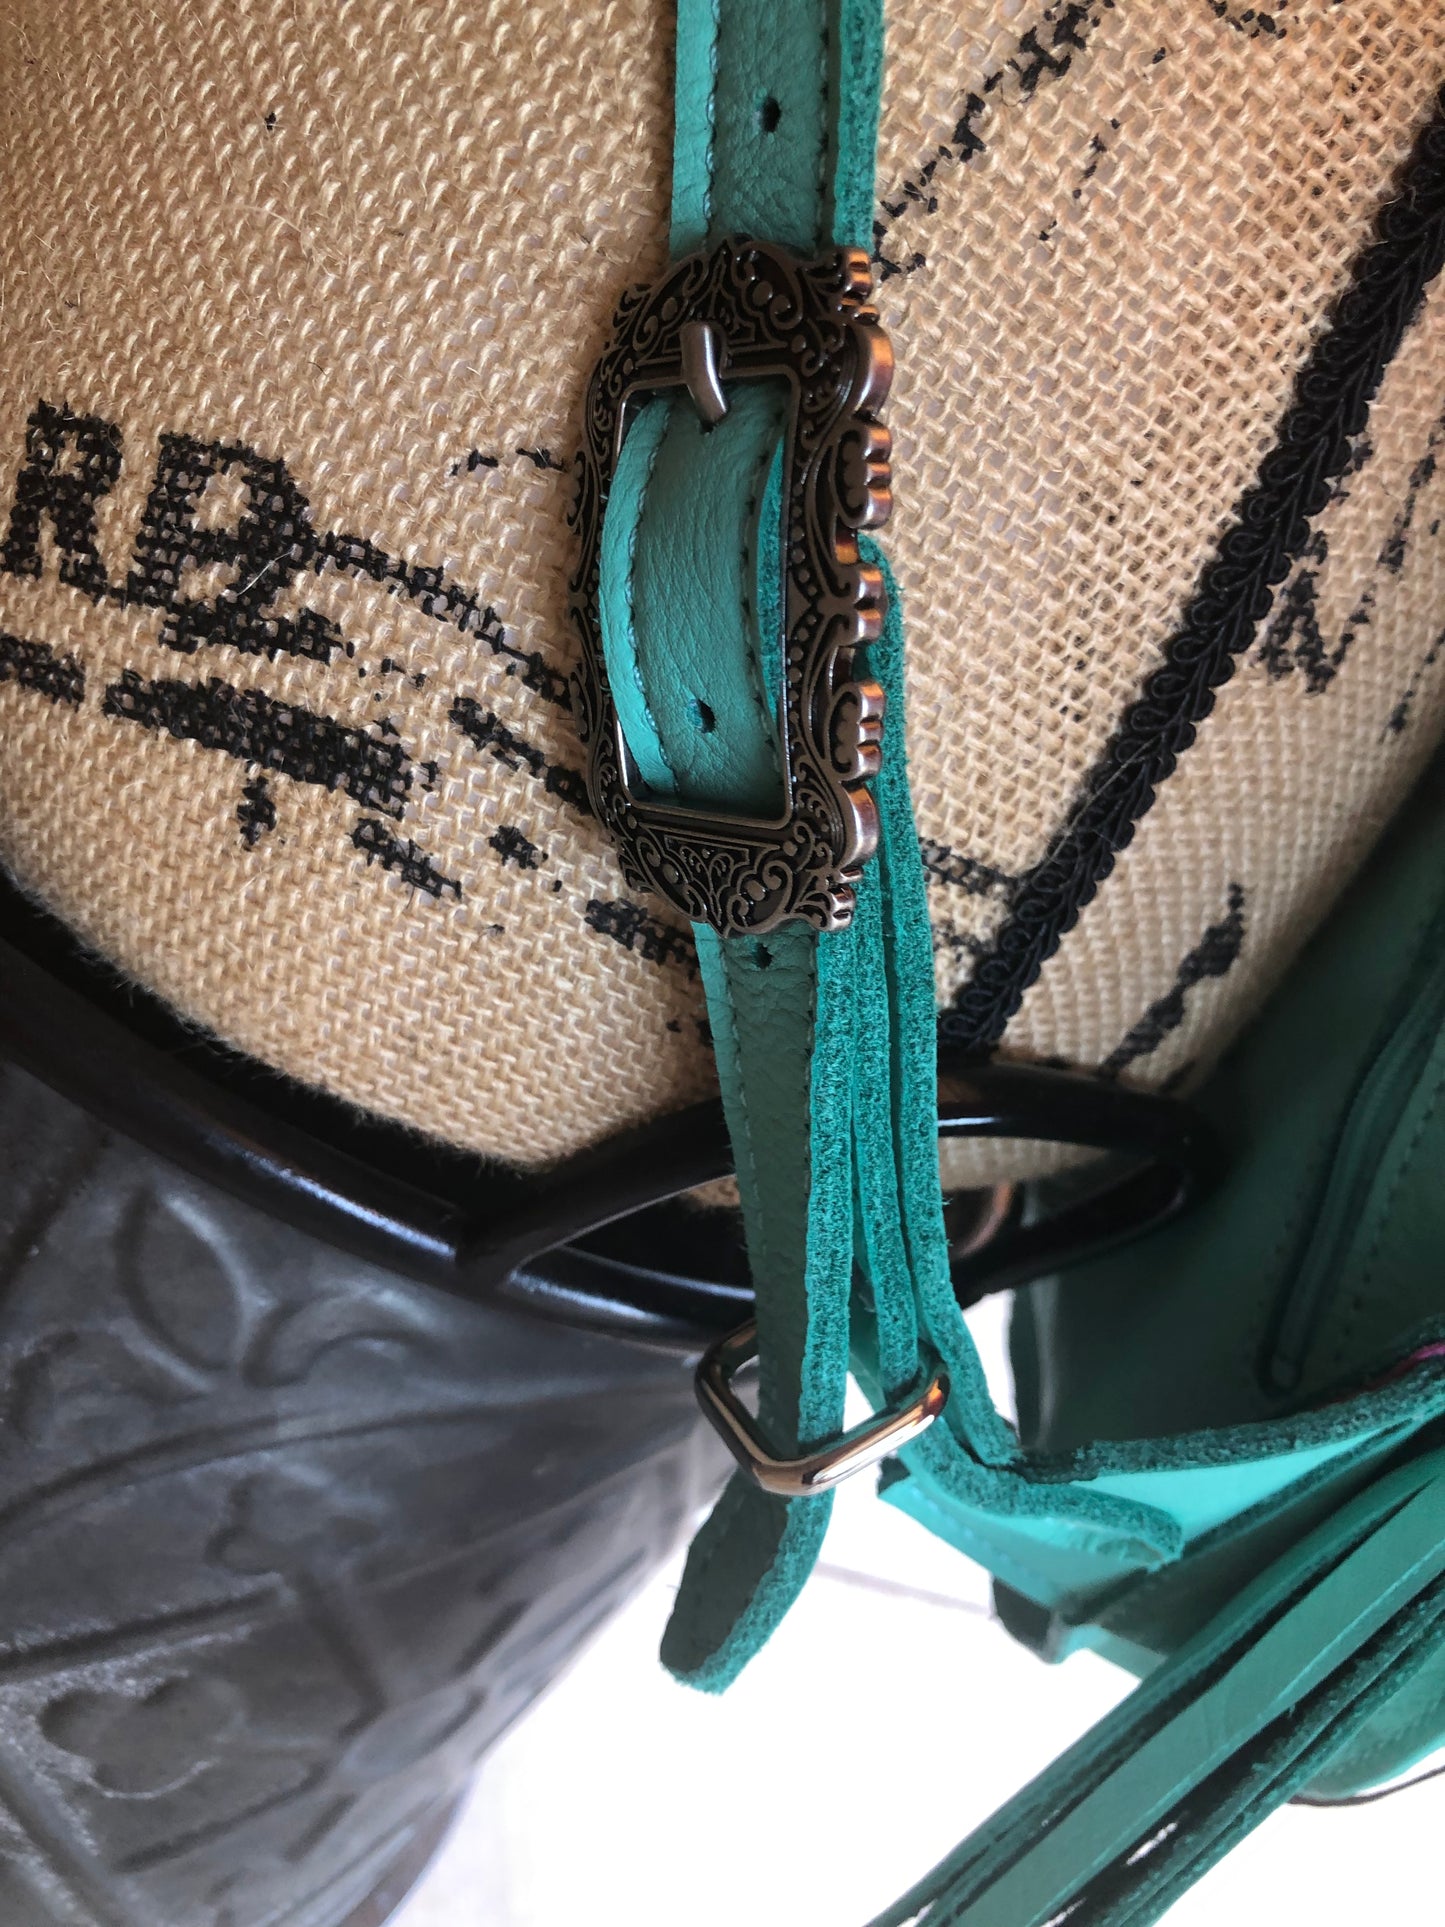 Western tooled leather cone flower with turquoise leather sling bag